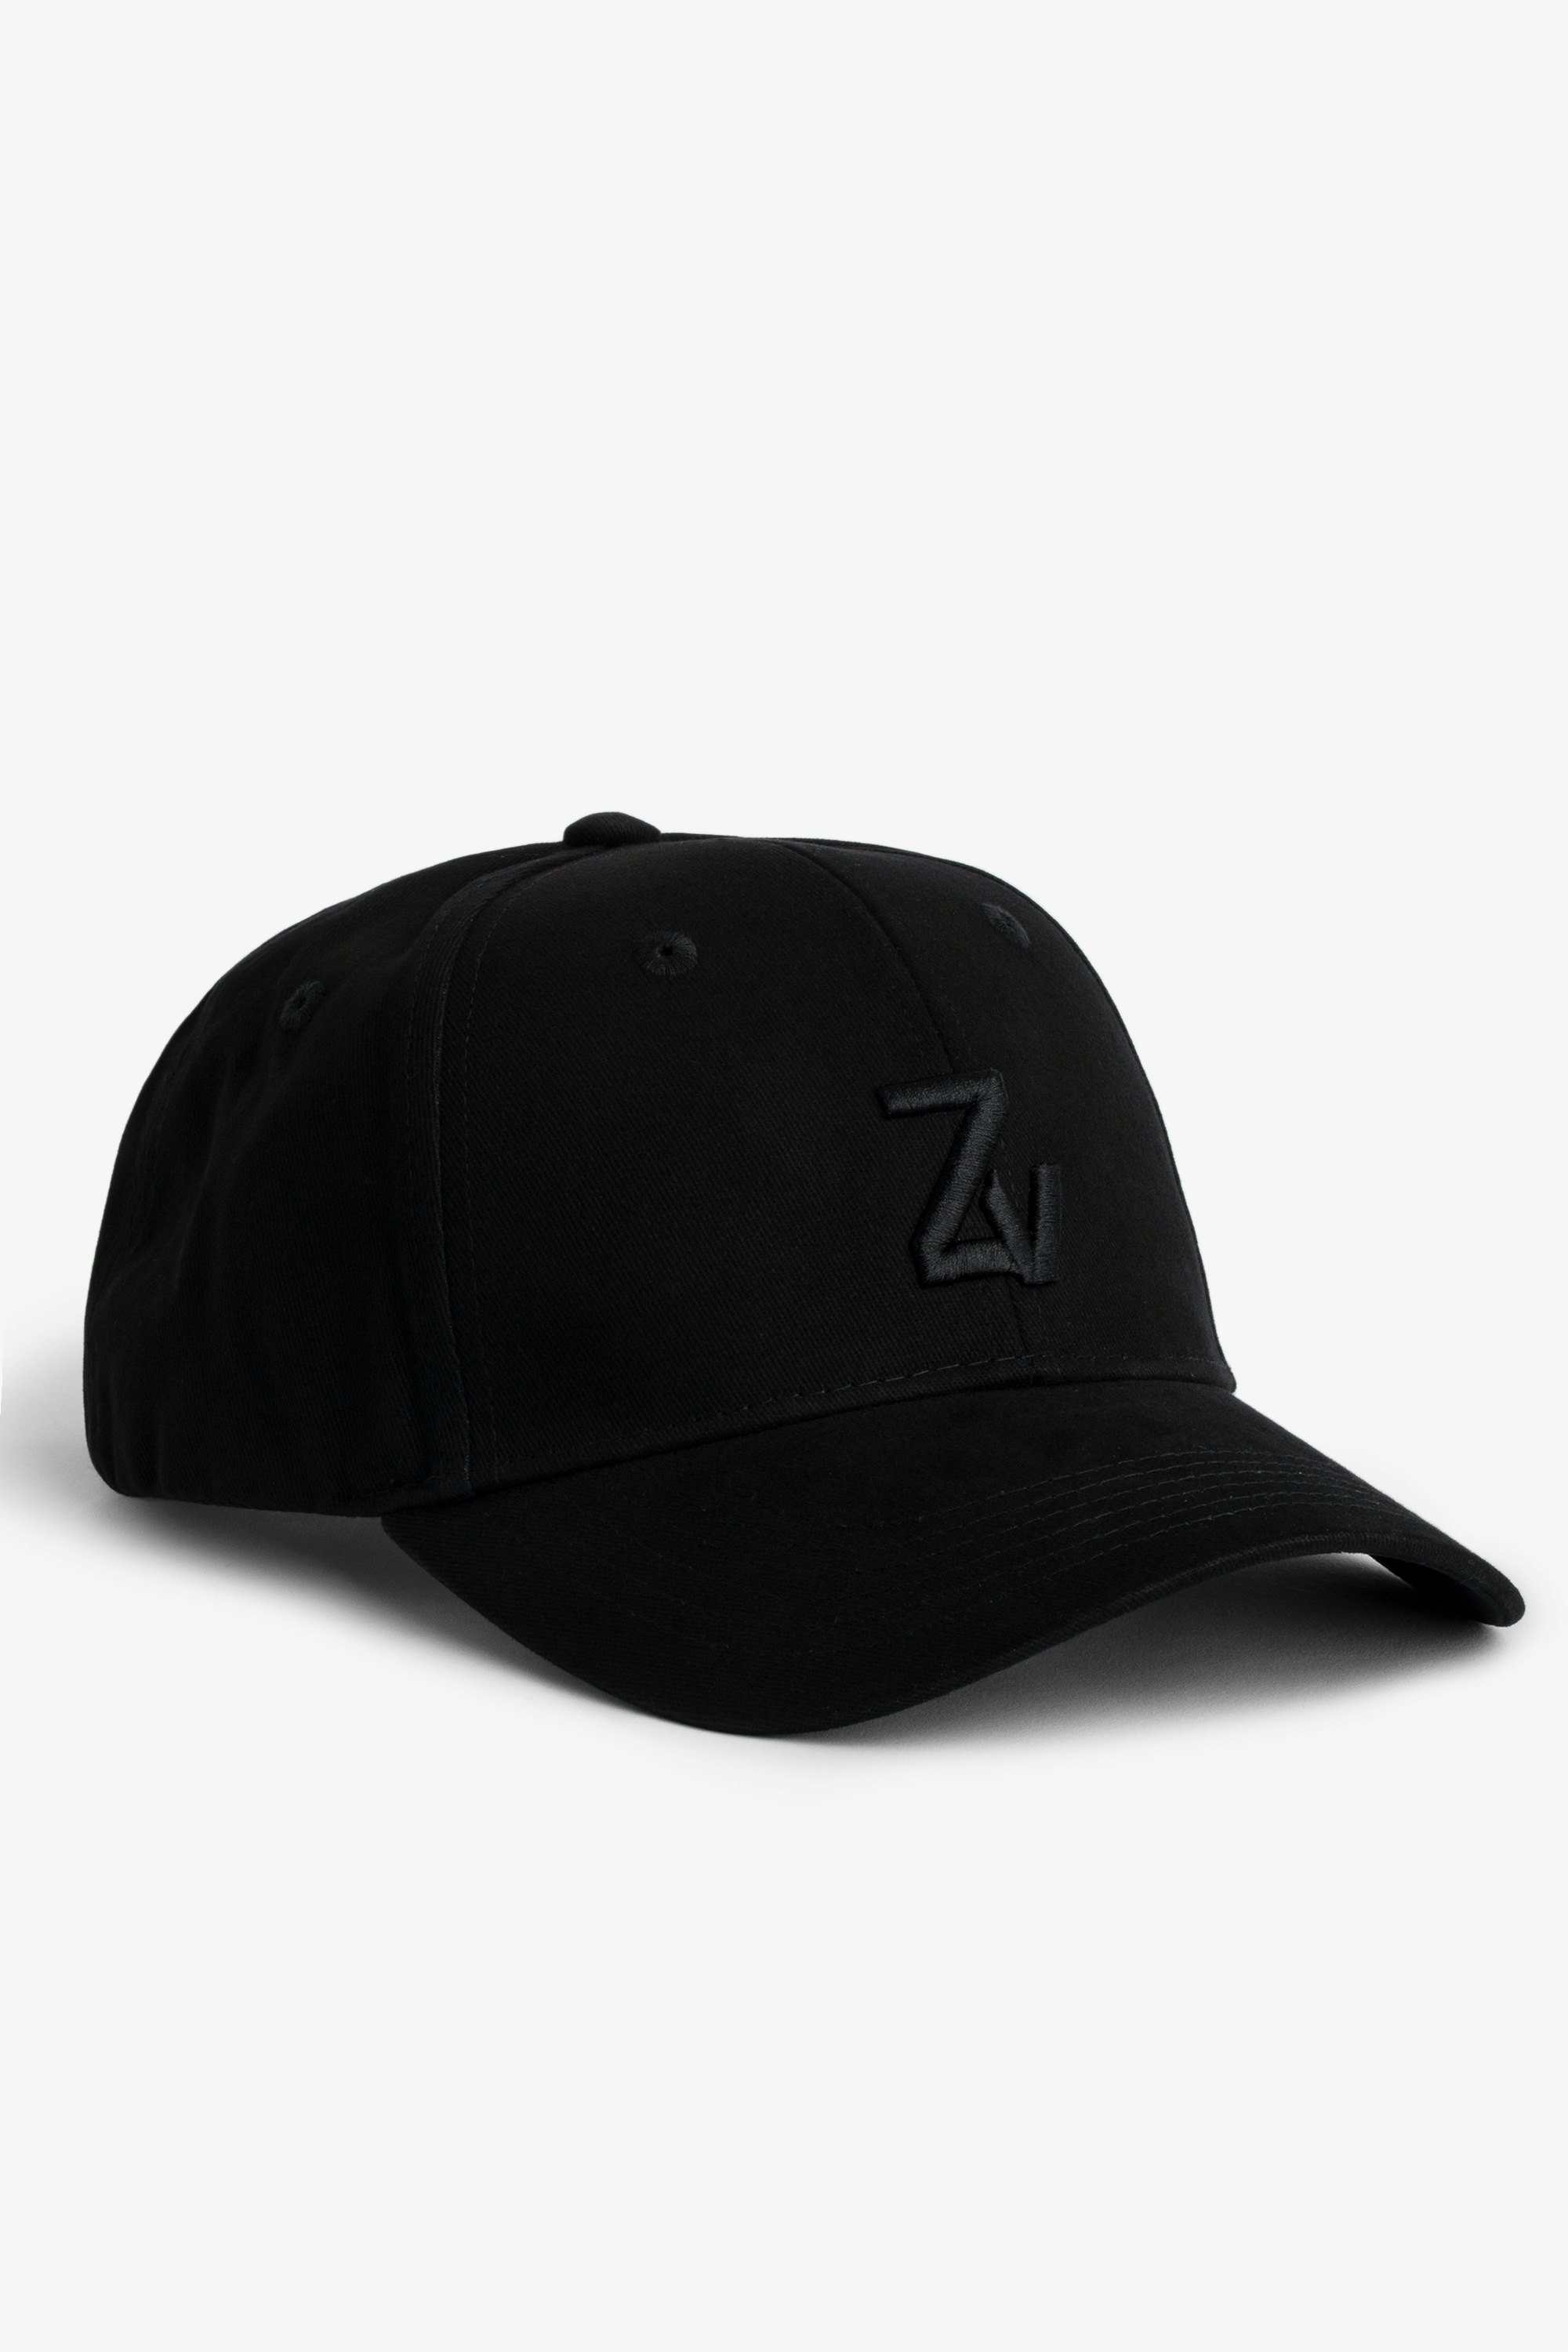 ZV Initiale Klelia Cap - Cotton cap embroidered with the ZV initials.